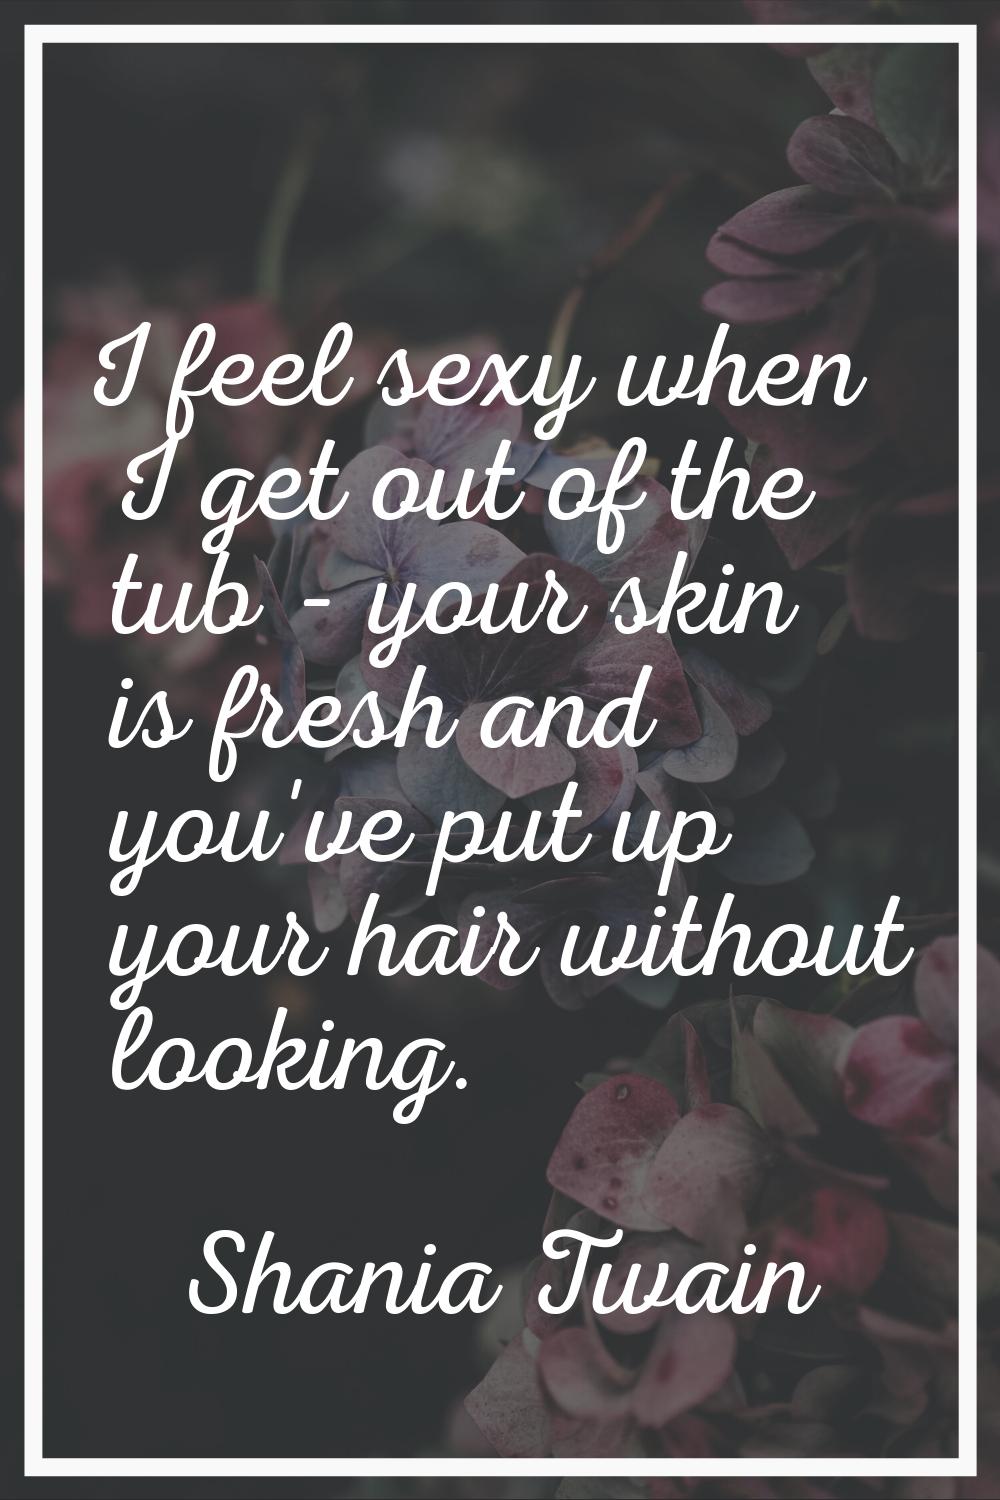 I feel sexy when I get out of the tub - your skin is fresh and you've put up your hair without look